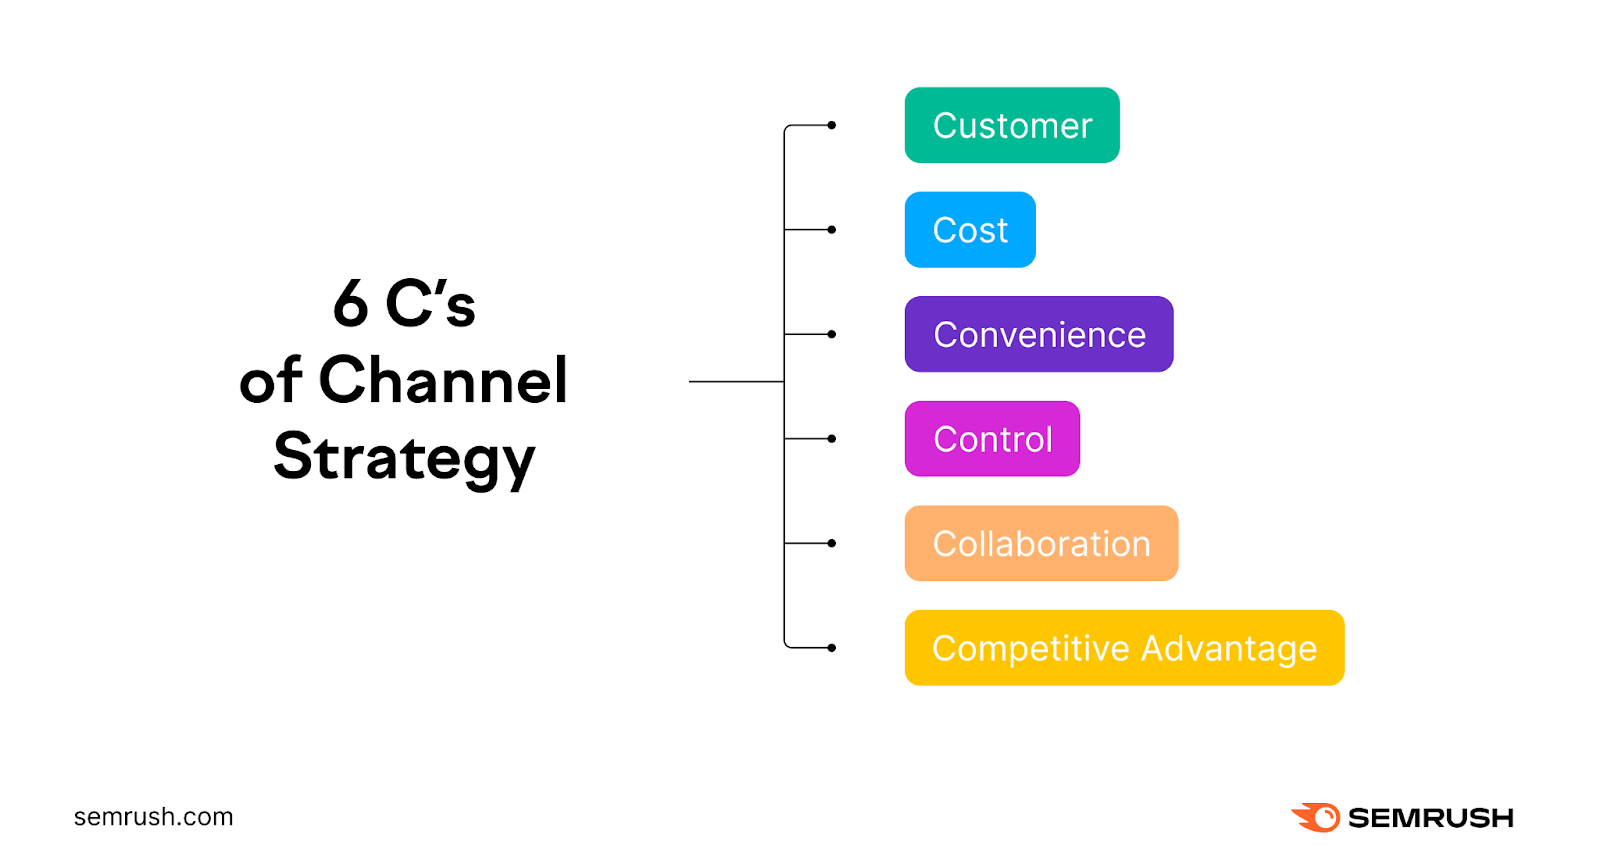 6 C's of Channel Strategy